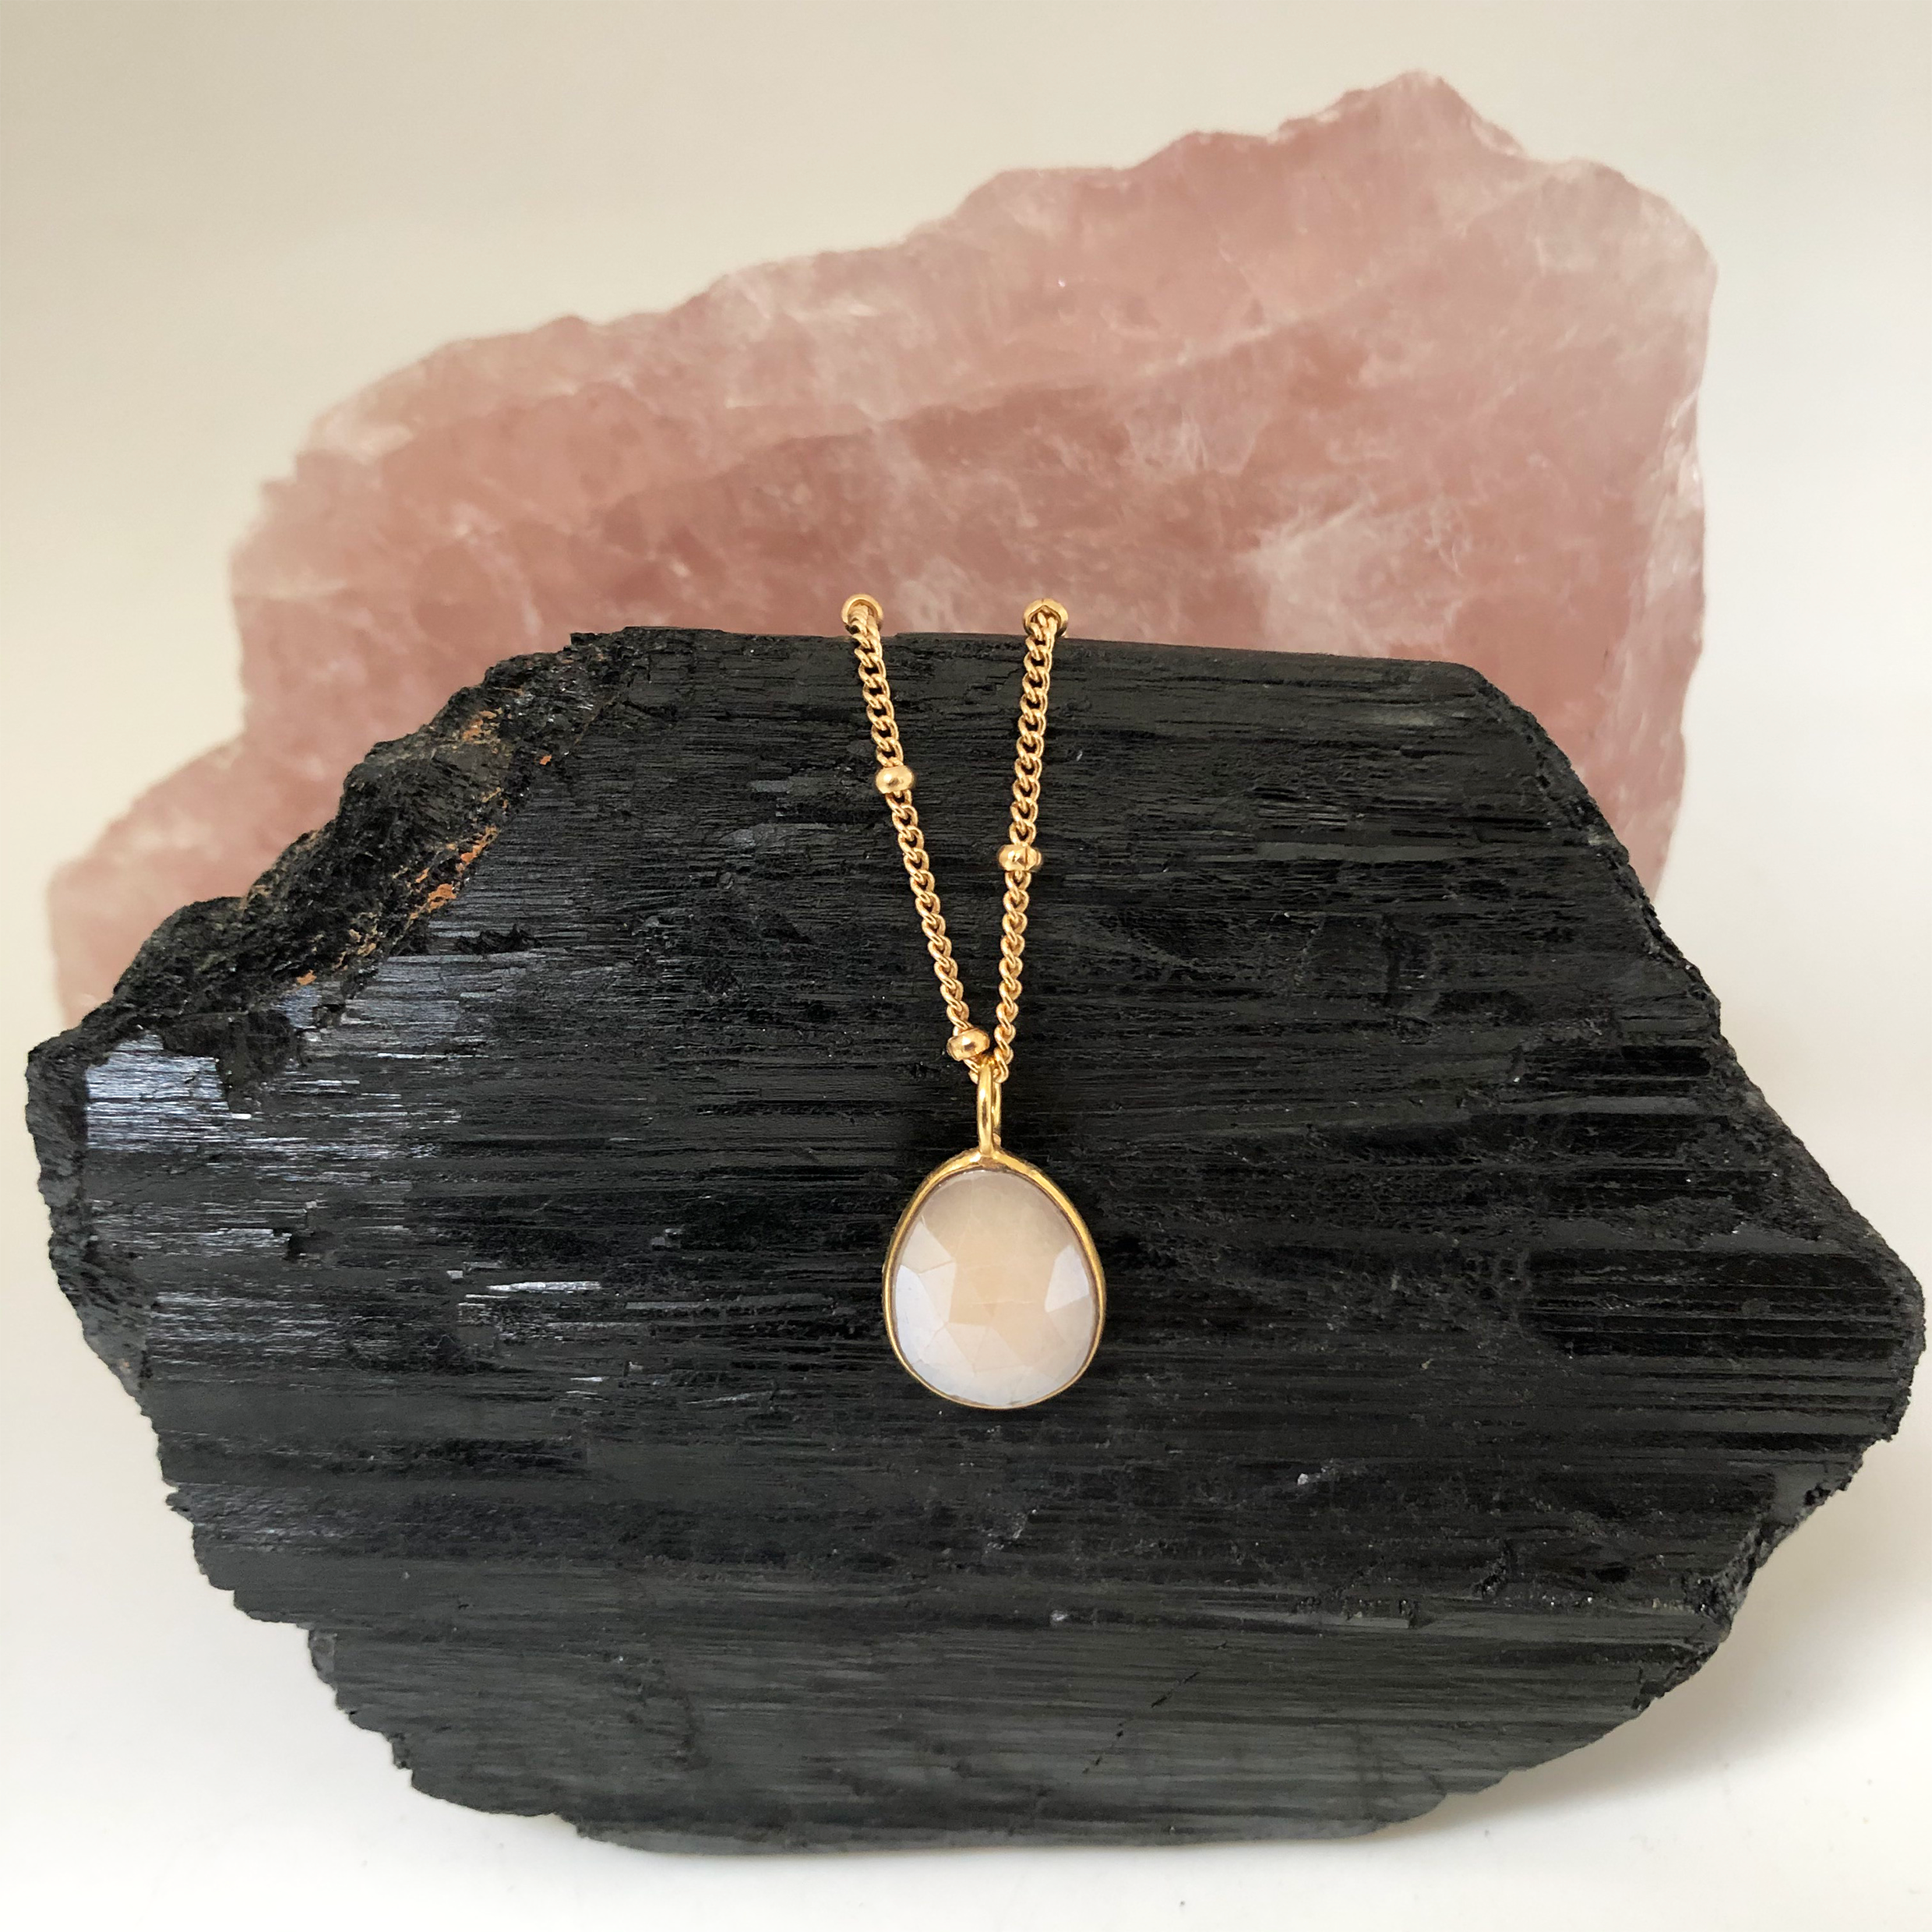 Facetted Silverite Pink Stone Pendant